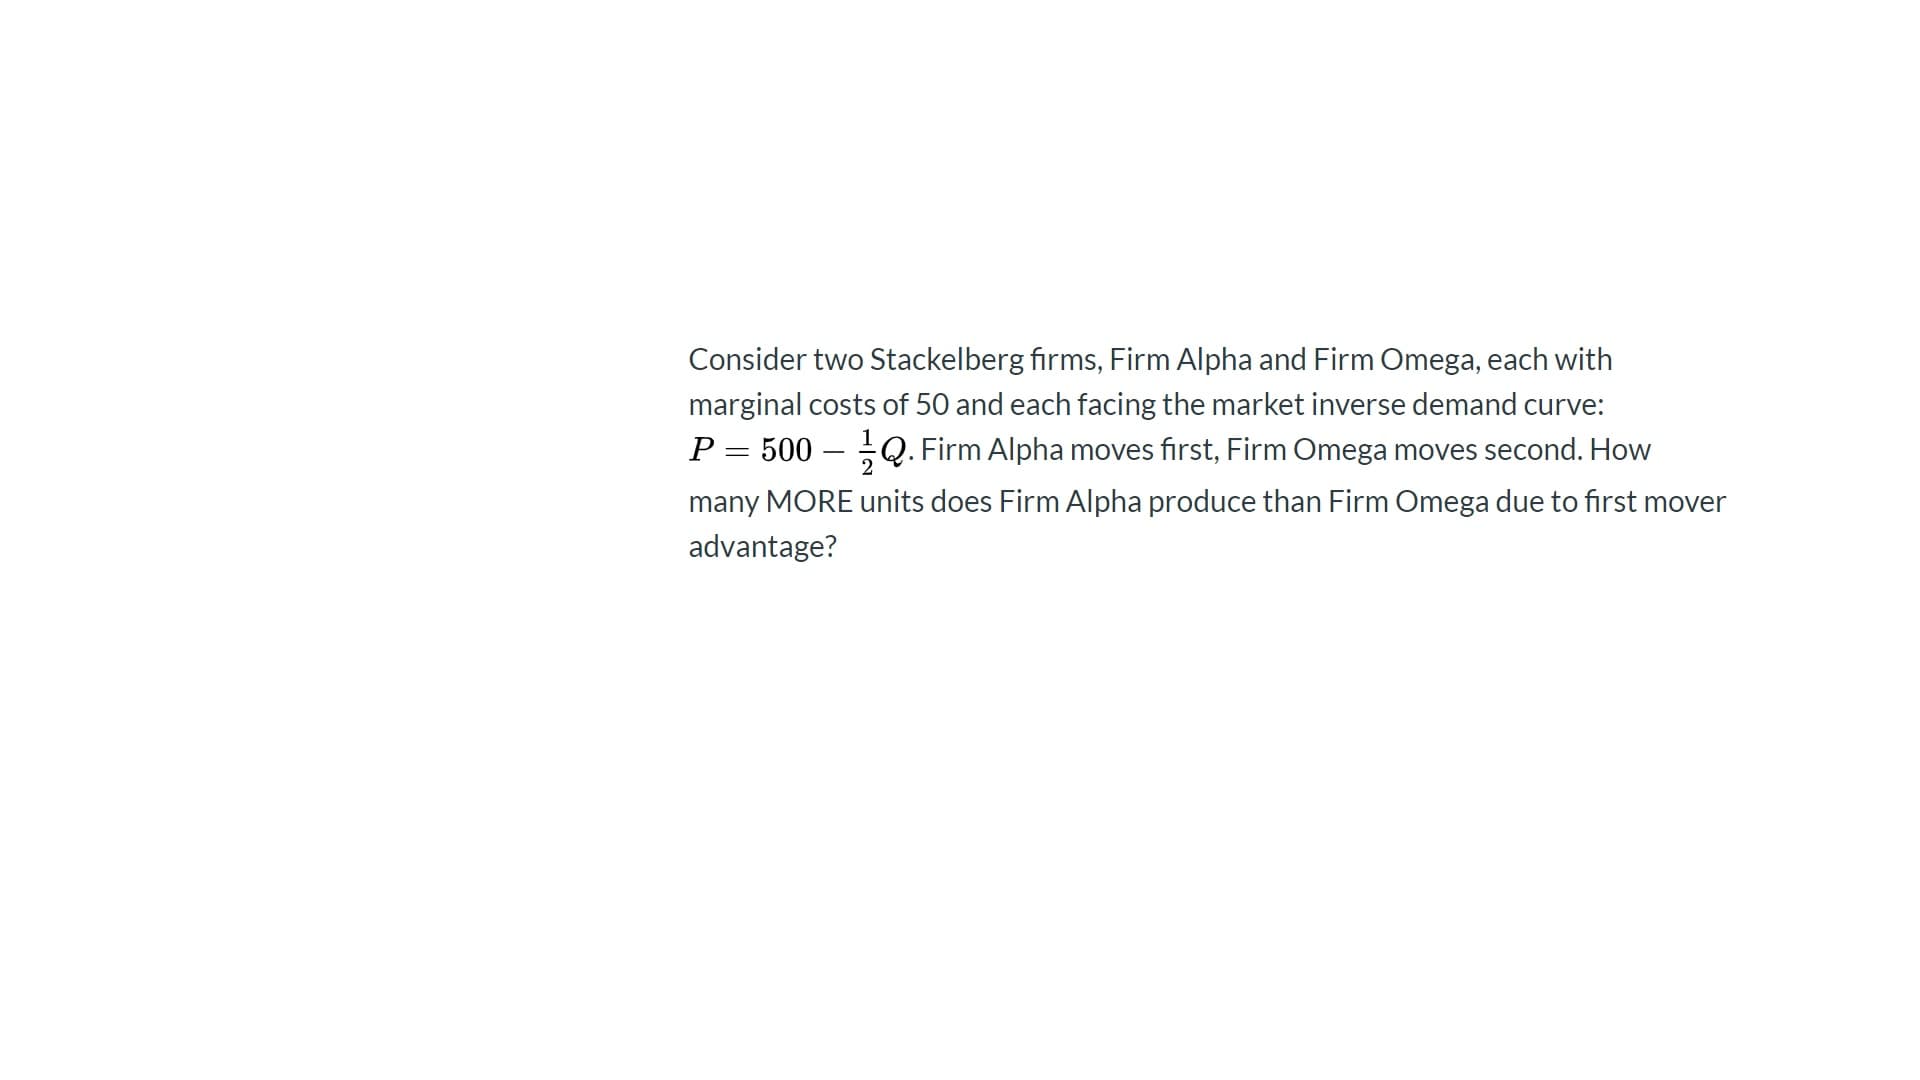 Consider two Stackelberg firms, Firm Alpha and Firm Omega, each with
marginal costs of 50 and each facing the market inverse demand curve:
P = 500 – Q. Firm Alpha moves first, Firm Omega moves second. How
many MORE units does Firm Alpha produce than Firm Omega due to first mover
advantage?
